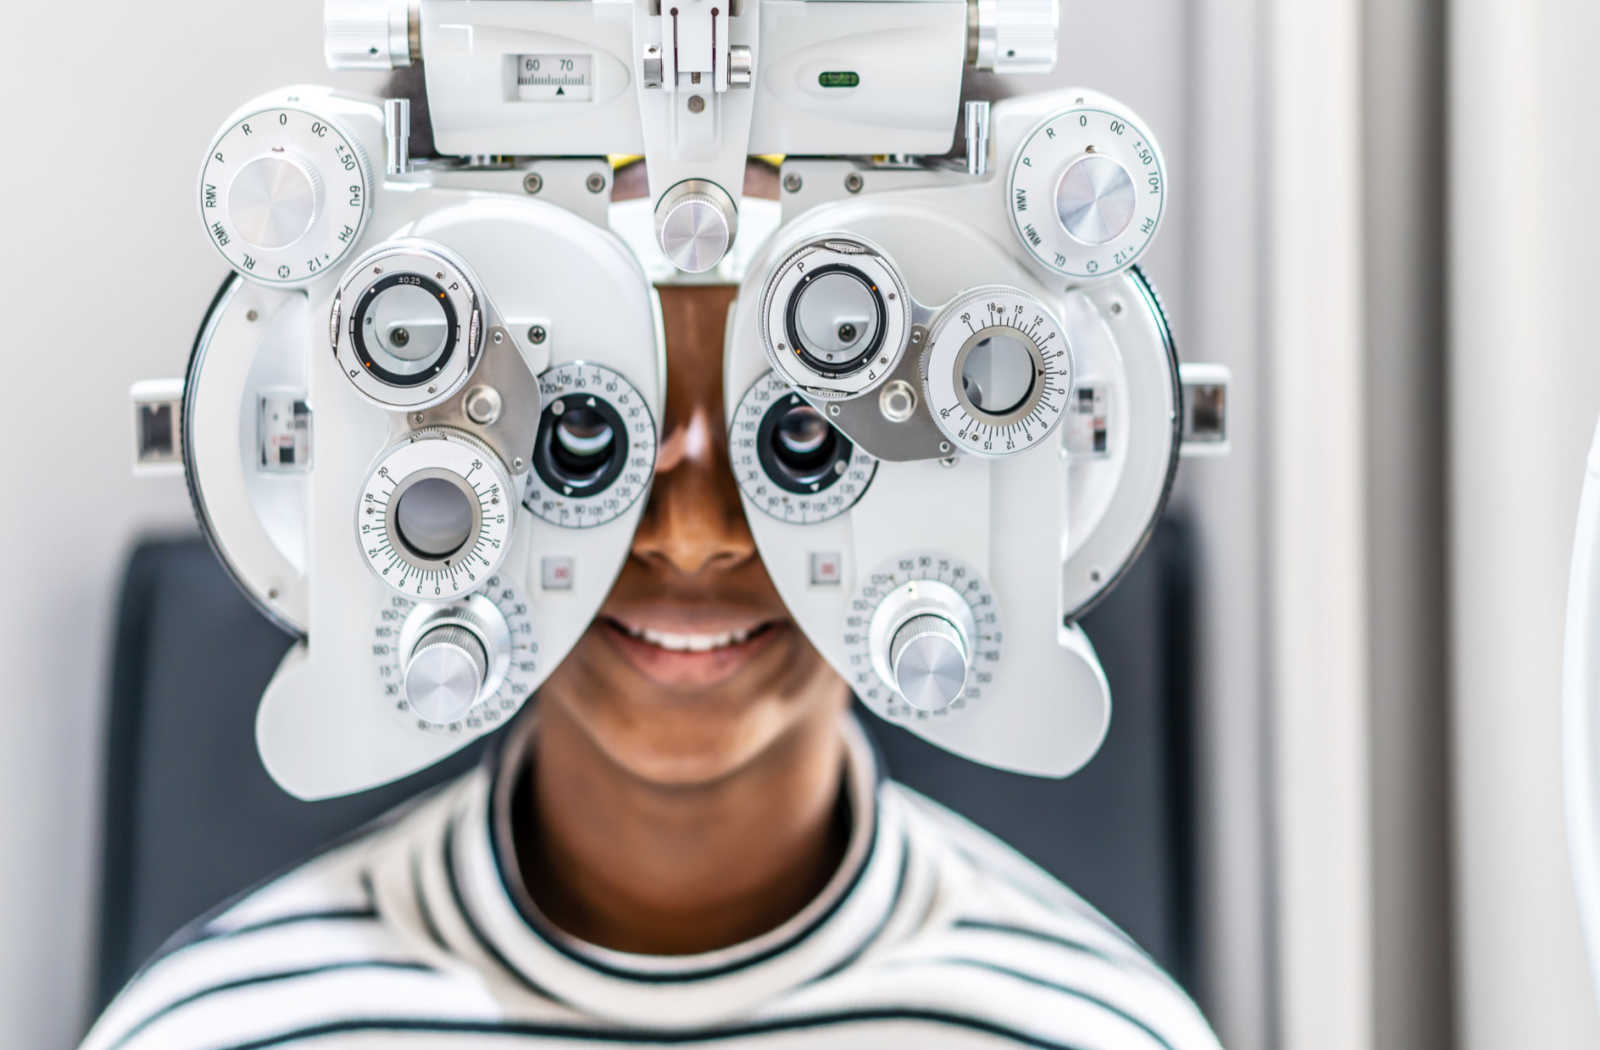 A young boy smiling while looking through a phoropter.